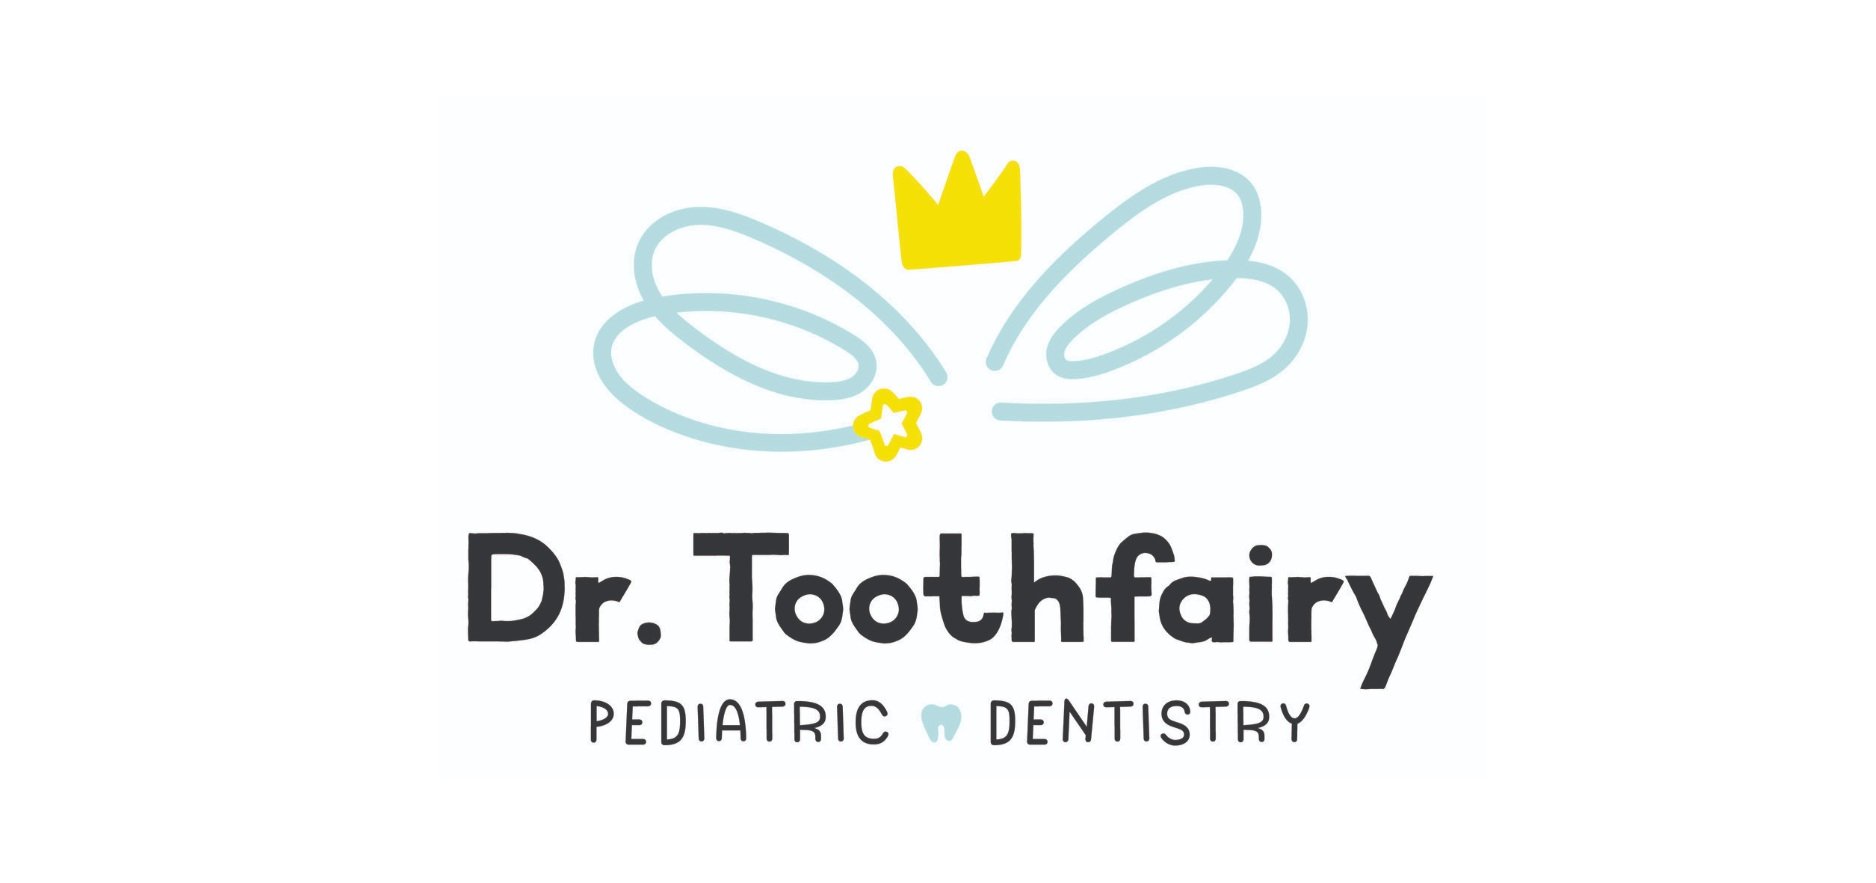 Dr. Tooth Fairy -